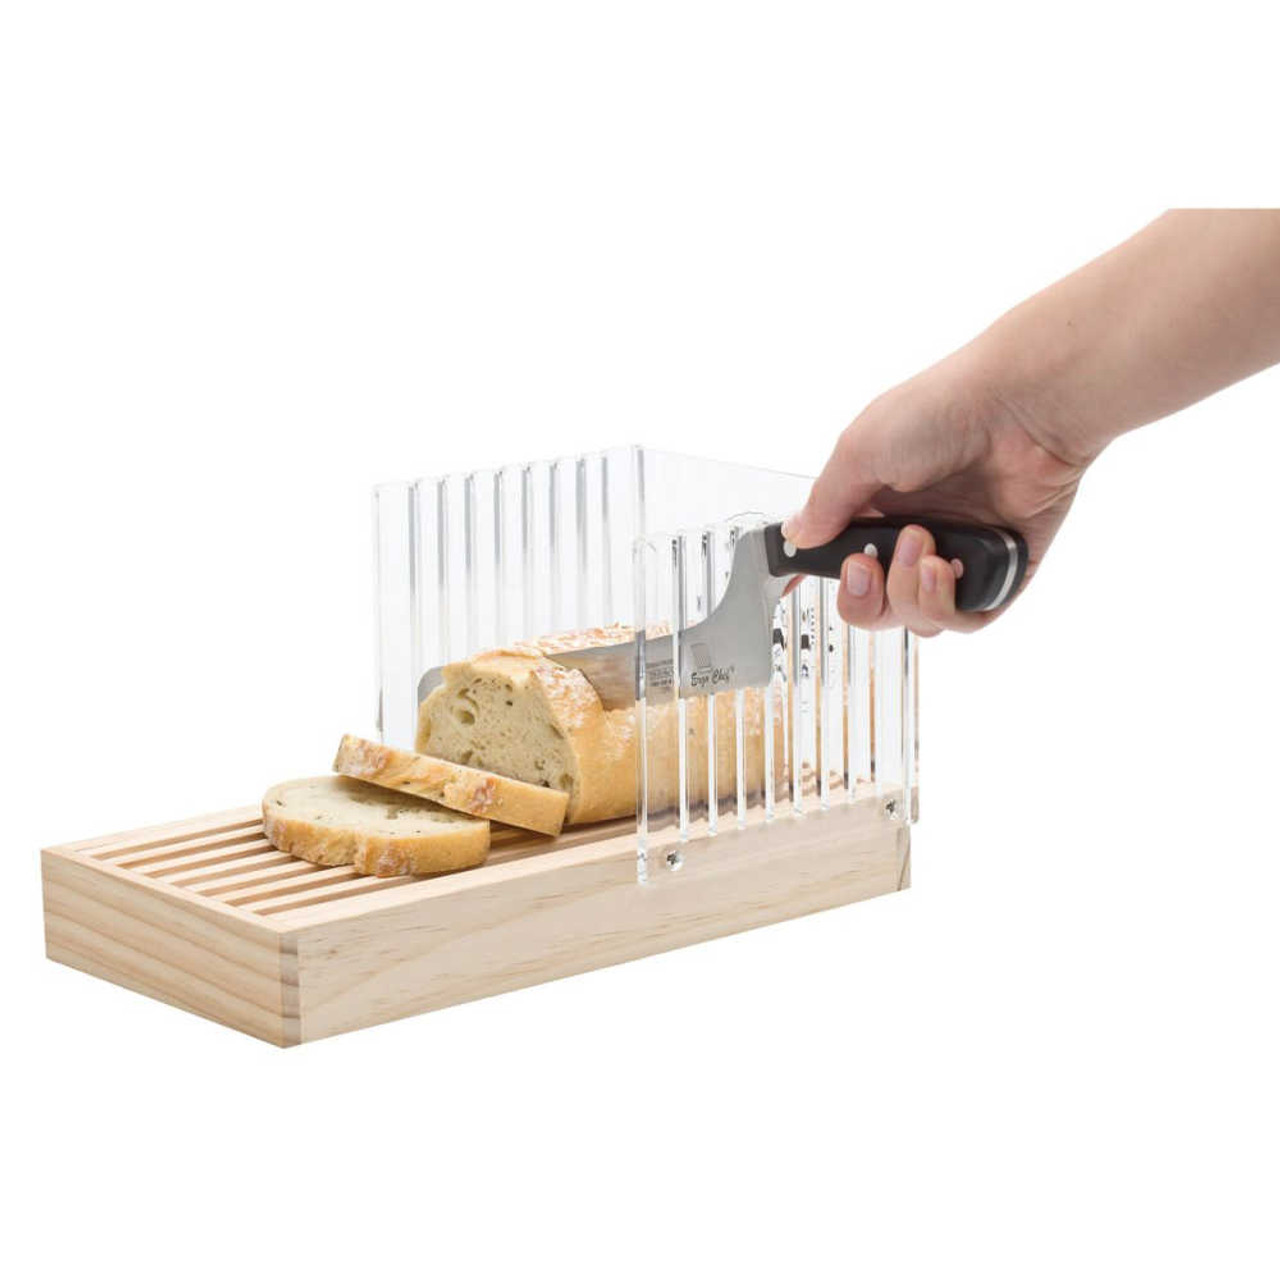 https://cdn11.bigcommerce.com/s-hccytny0od/images/stencil/1280x1280/products/4848/19972/Mrs._Andersons_Bread_Slicing_Guide_1__11975.1656470470.jpg?c=2?imbypass=on